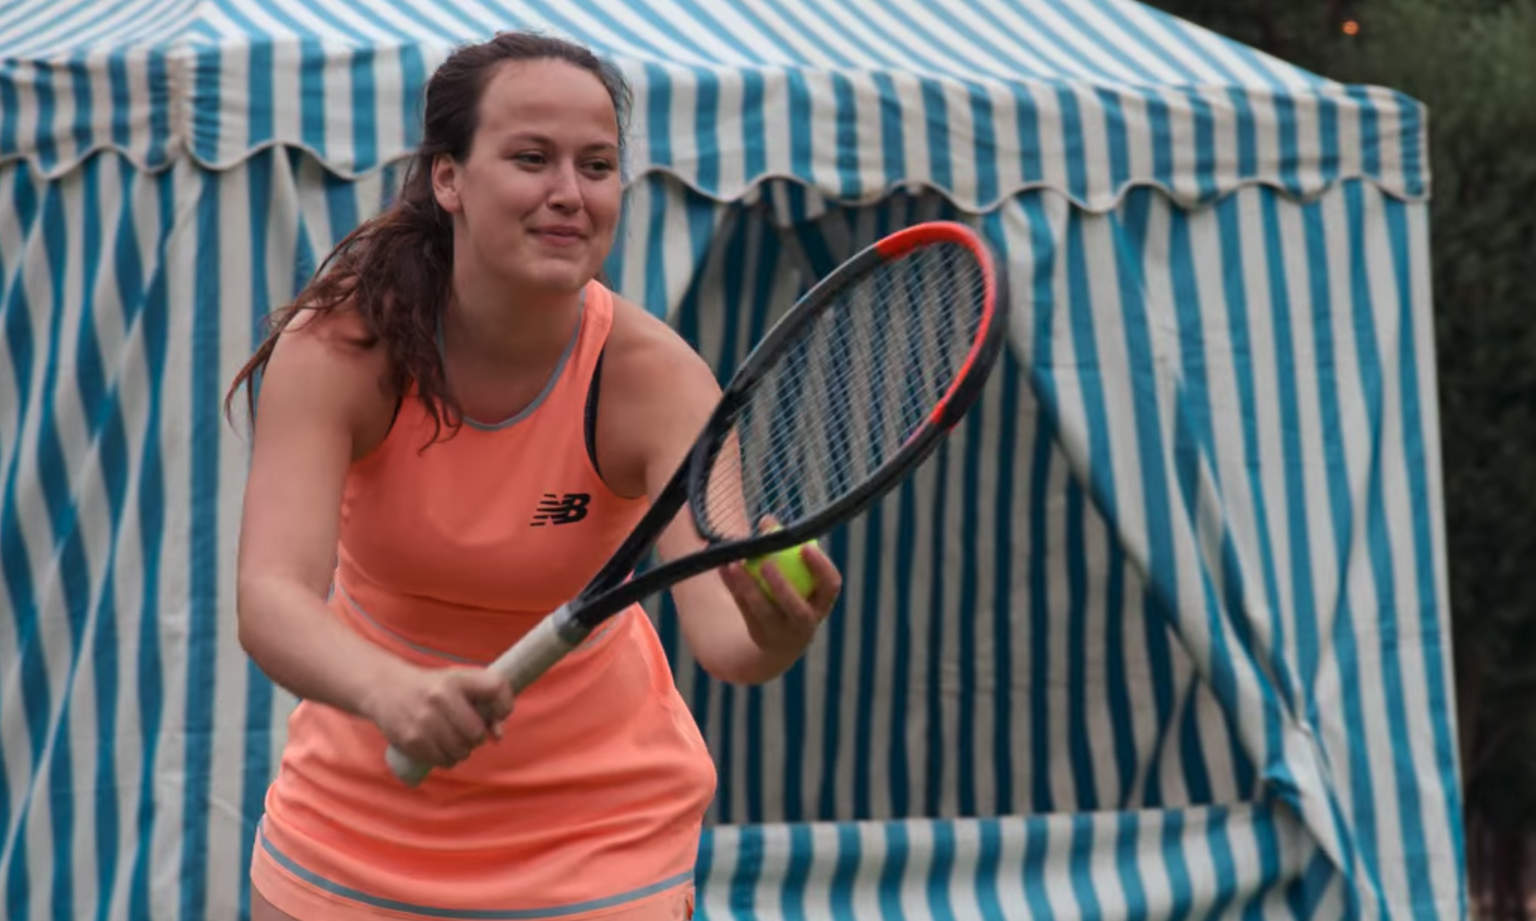 wives play tennis in porn videos